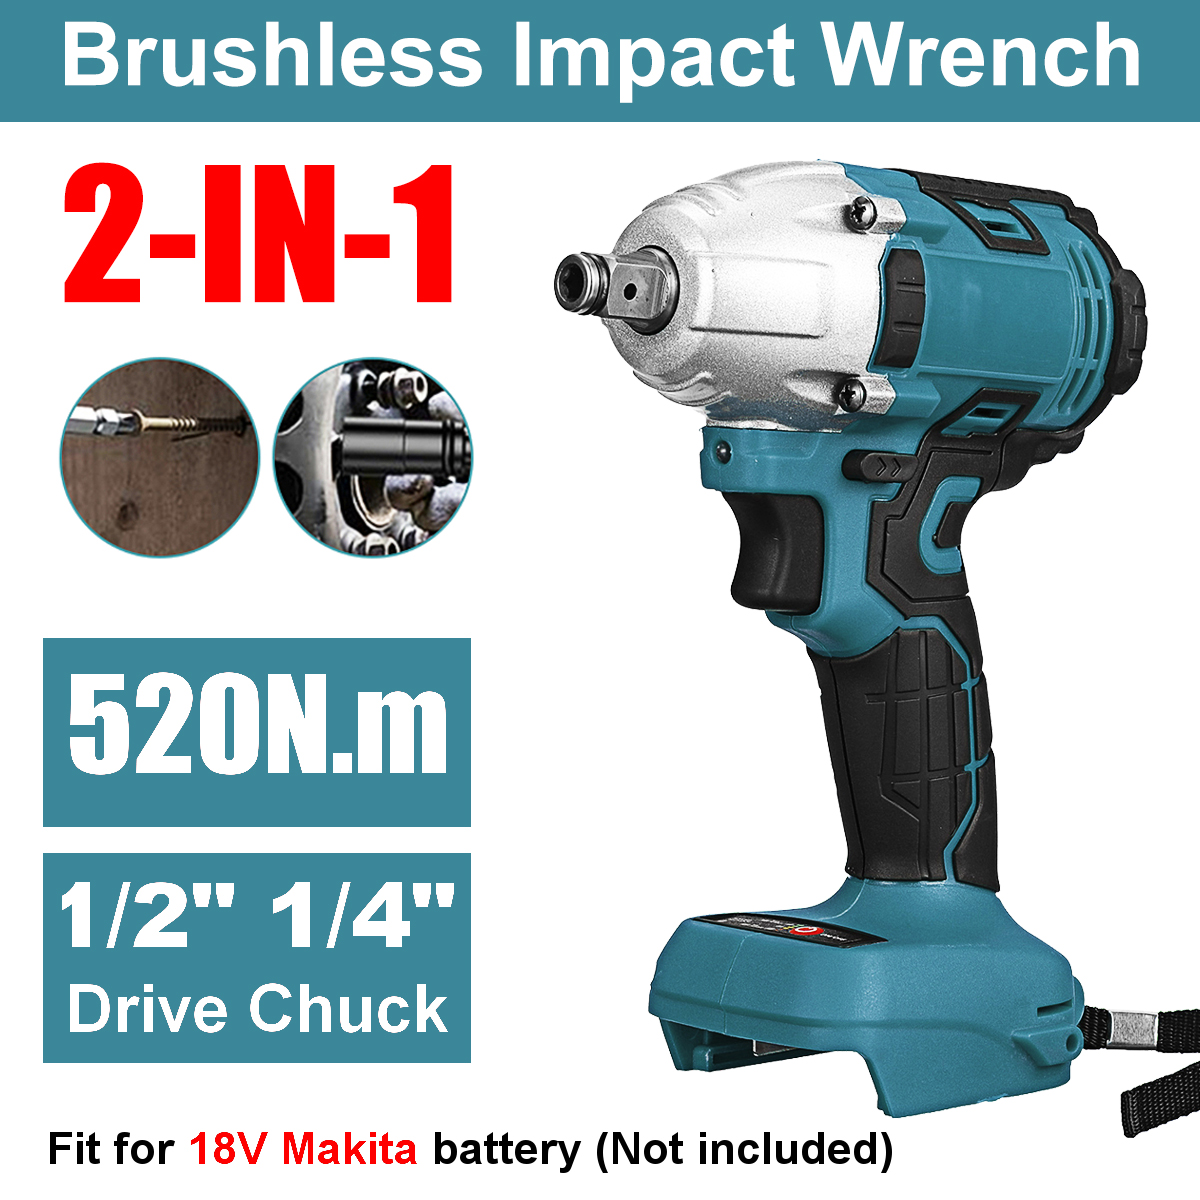 2-in1-520Nm-Li-Ion-Brushless-Cordless-Electric-12quot-Wrench-14quotScrewdriver-Drill-for-Makita-18V--1868317-2